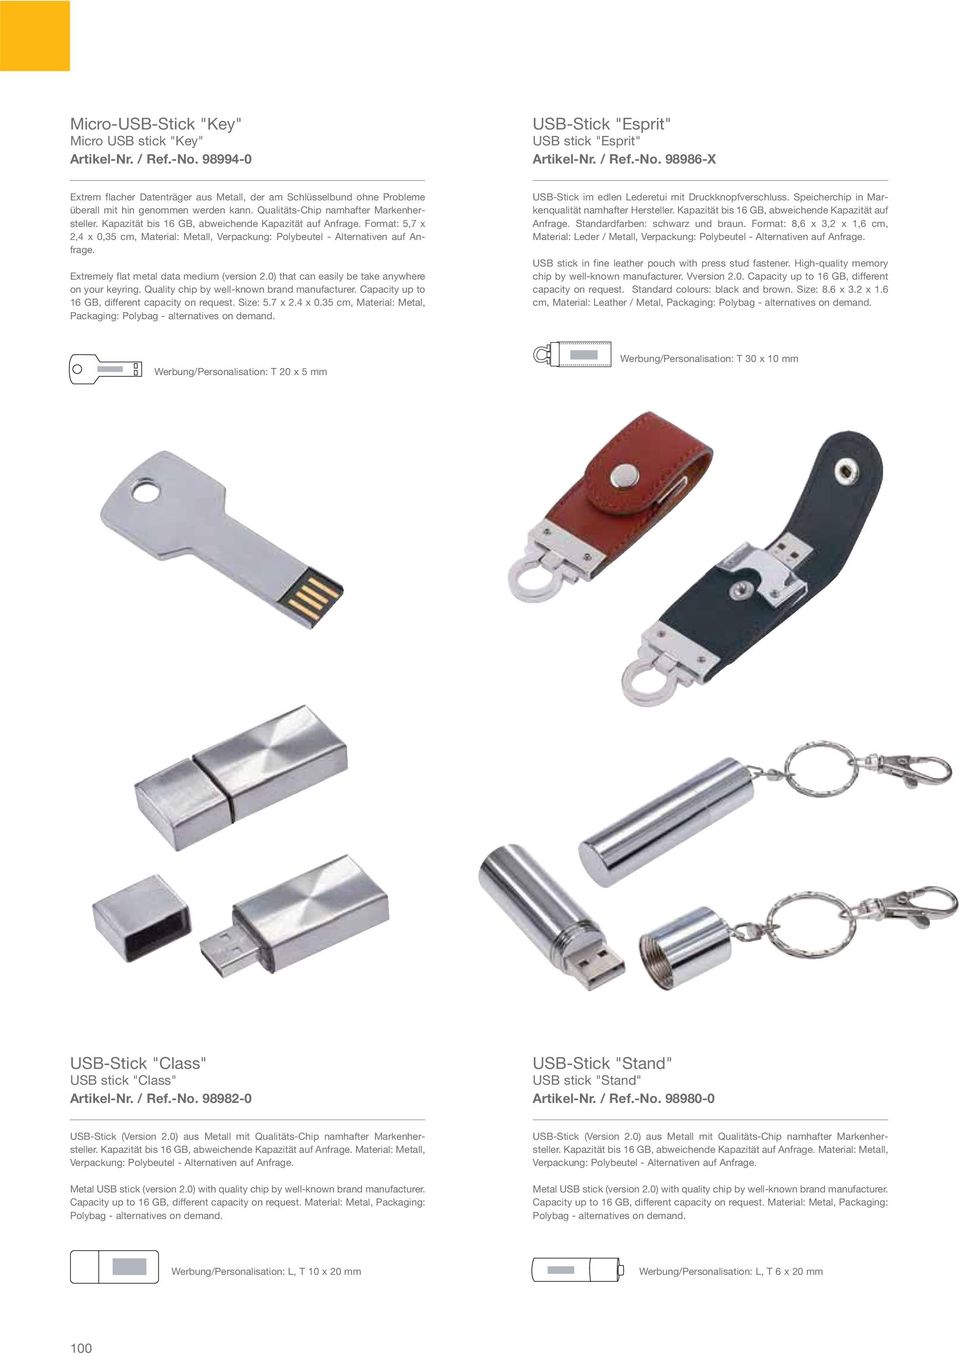 Extremely flat metal data medium (version 2.0) that can easily be take anywhere on your keyring. Quality chip by well-known brand manufacturer. Capacity up to 16 GB, different capacity on request.